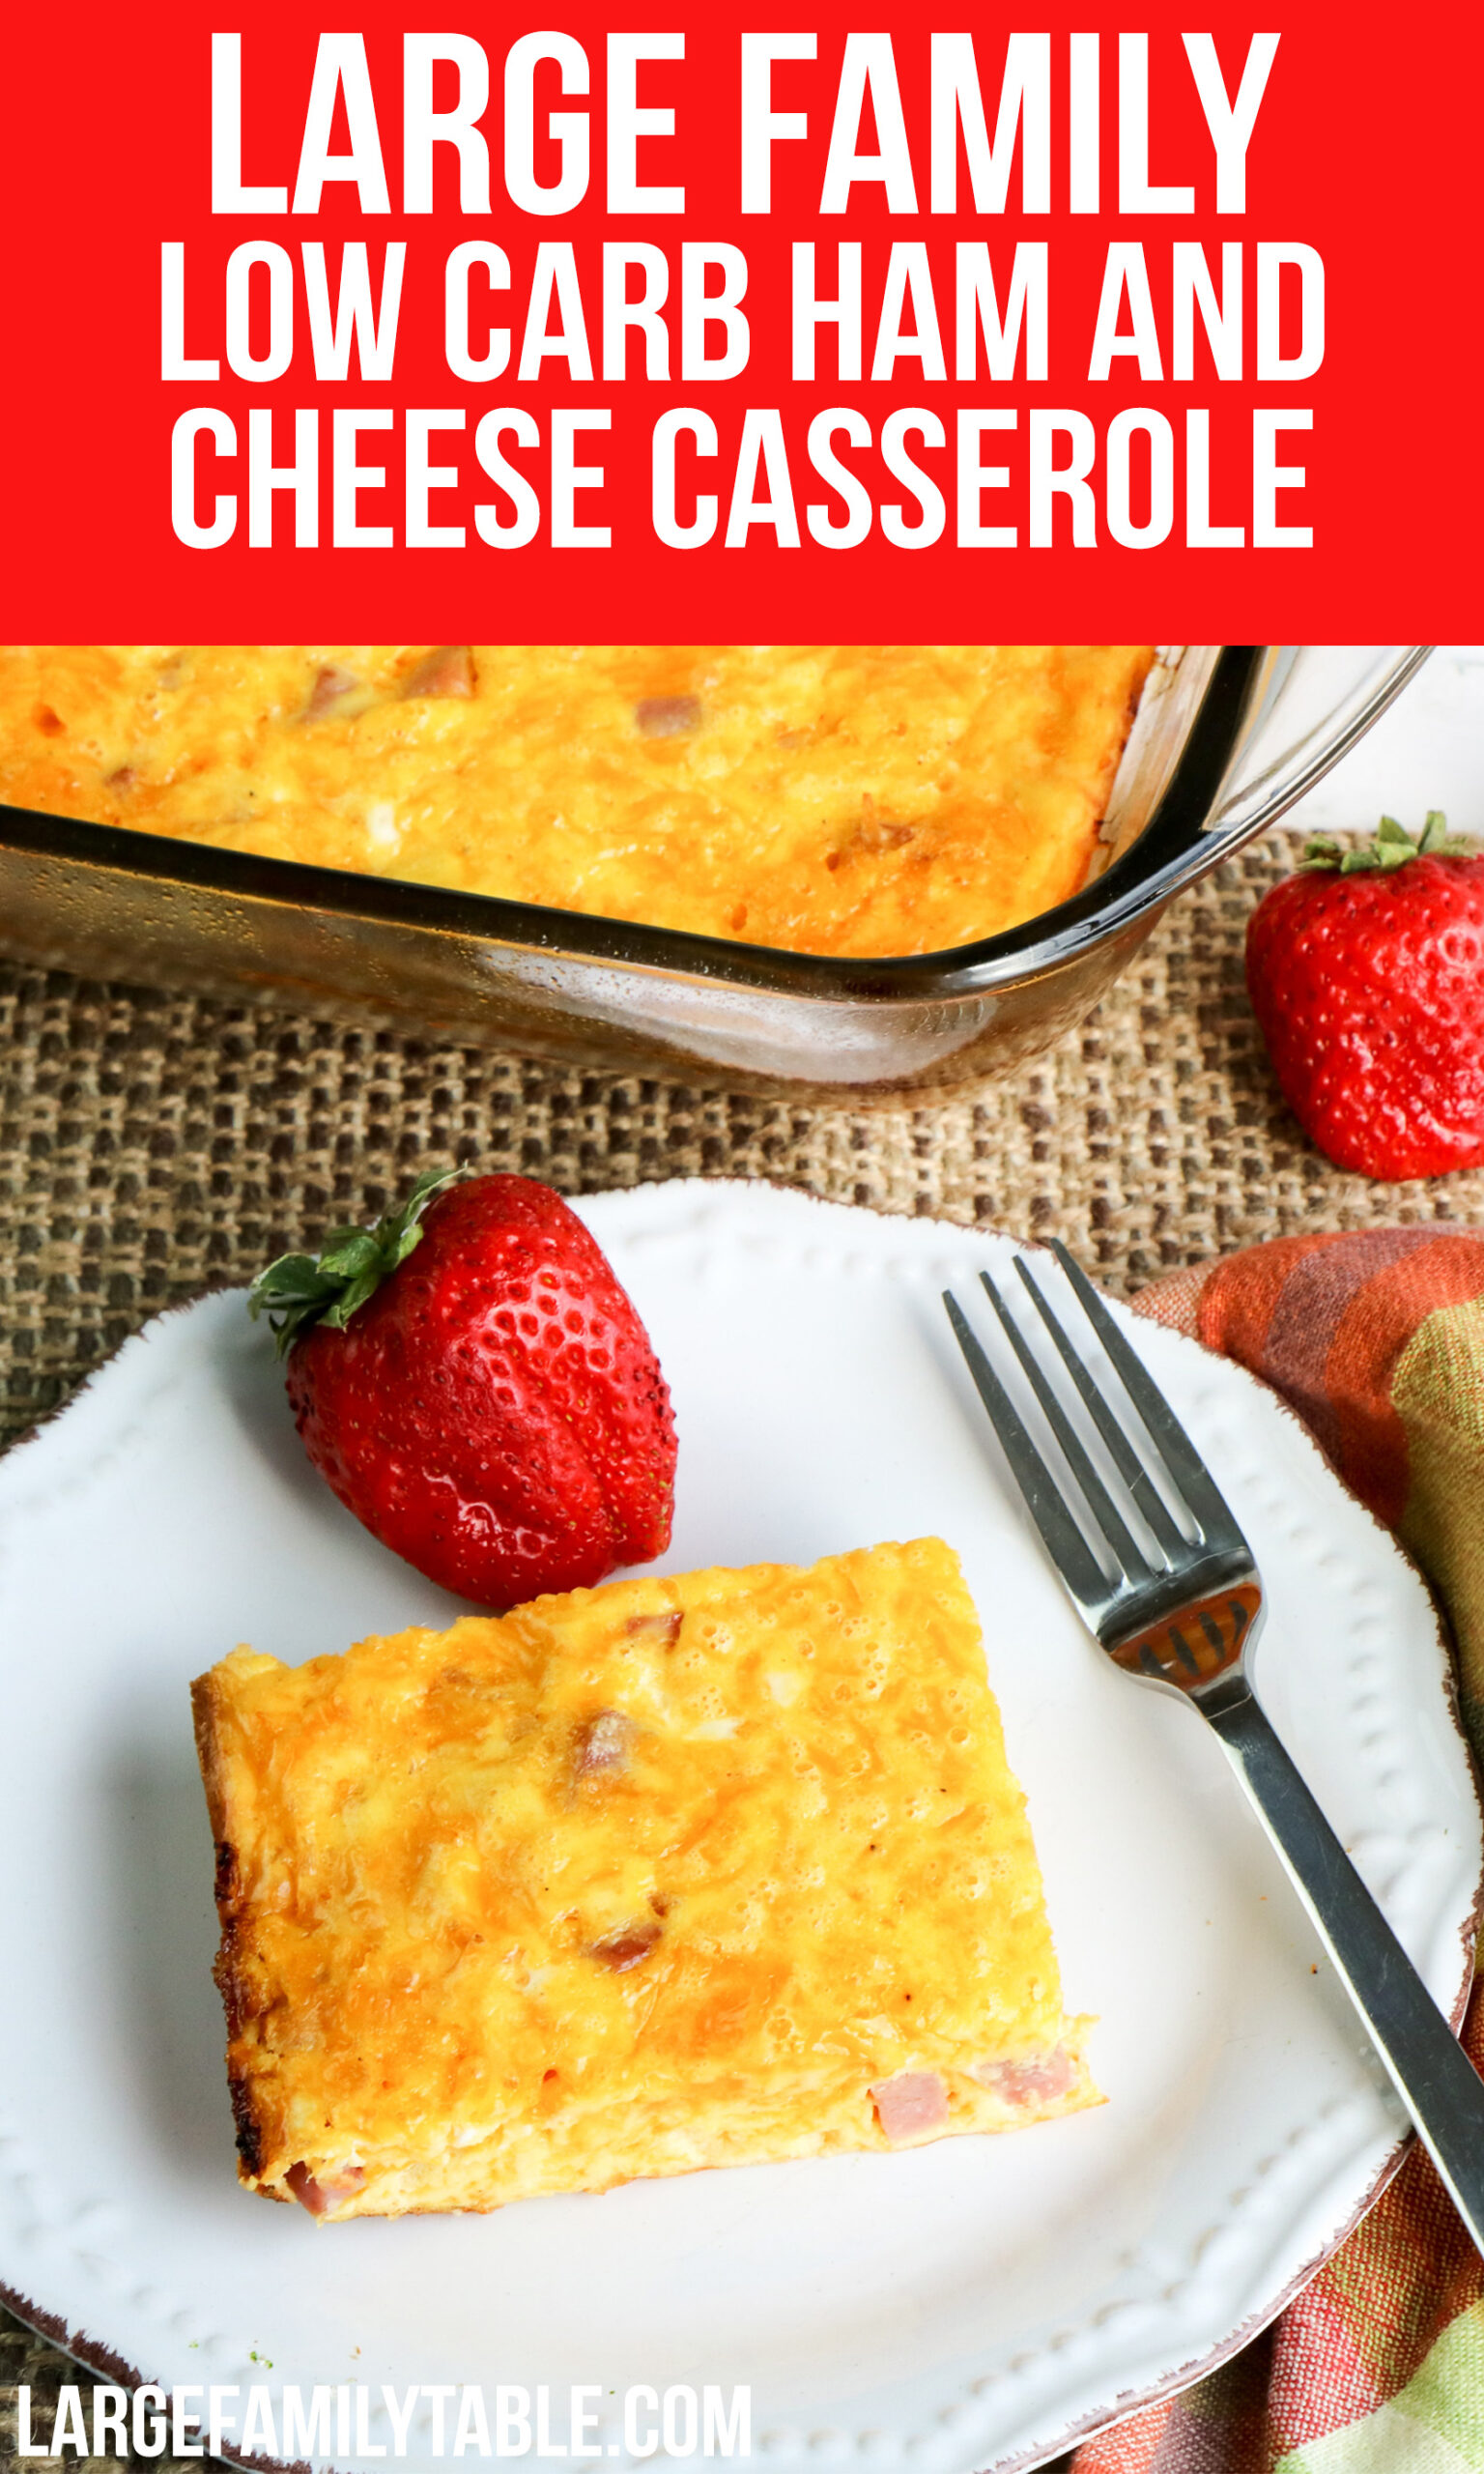 Low Carb Ham and Cheese Casserole